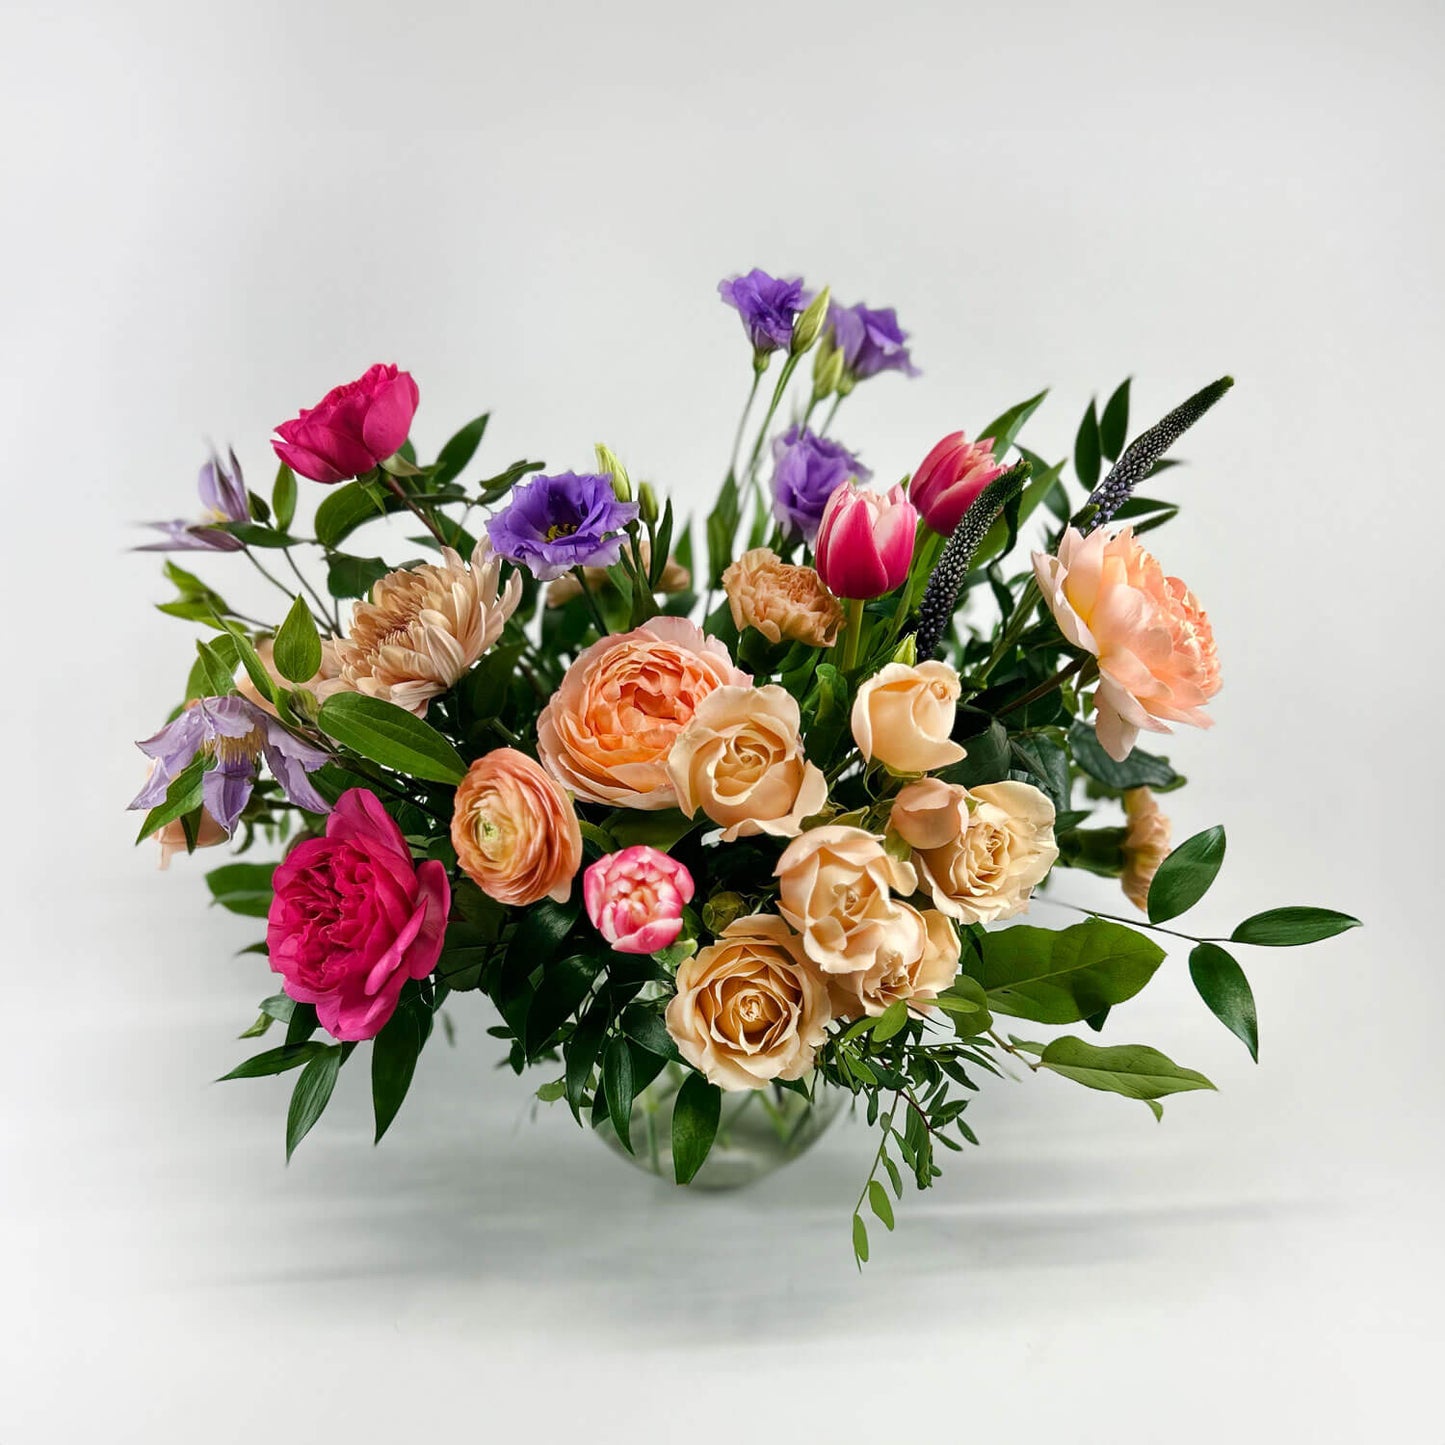 Image of a funny valentines day bouquet with lavender lisianthus, blue clematis, pink, peach, and apricot garden roses, double tulips, apricot ranunculus, and carnations. Order online for same-day flower delivery from Toronto's best florist, available near you.